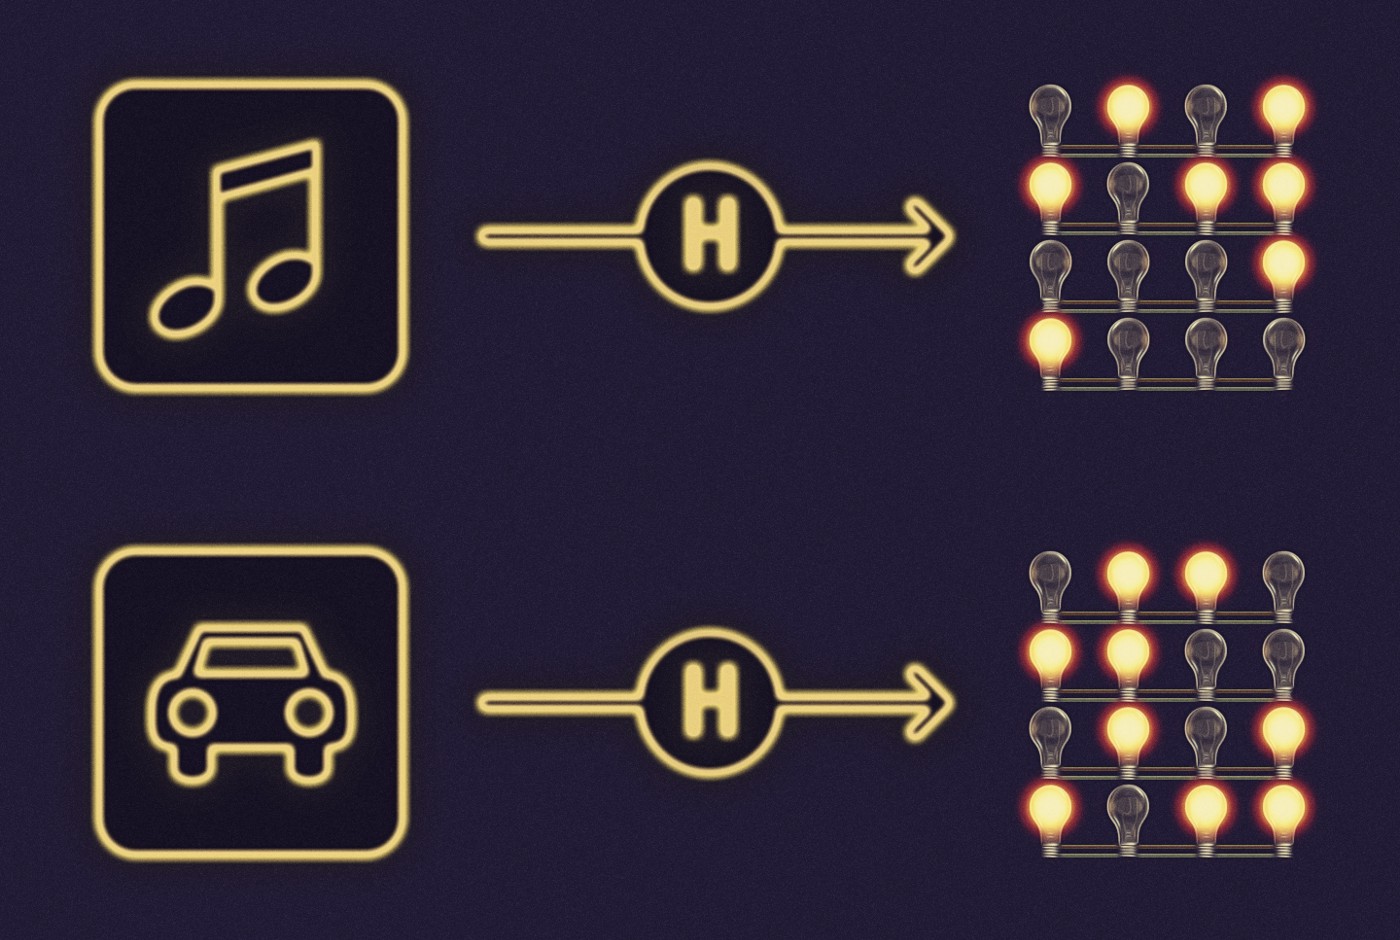 Song and vehicle being hashed produces a unique pattern of lit bulbs